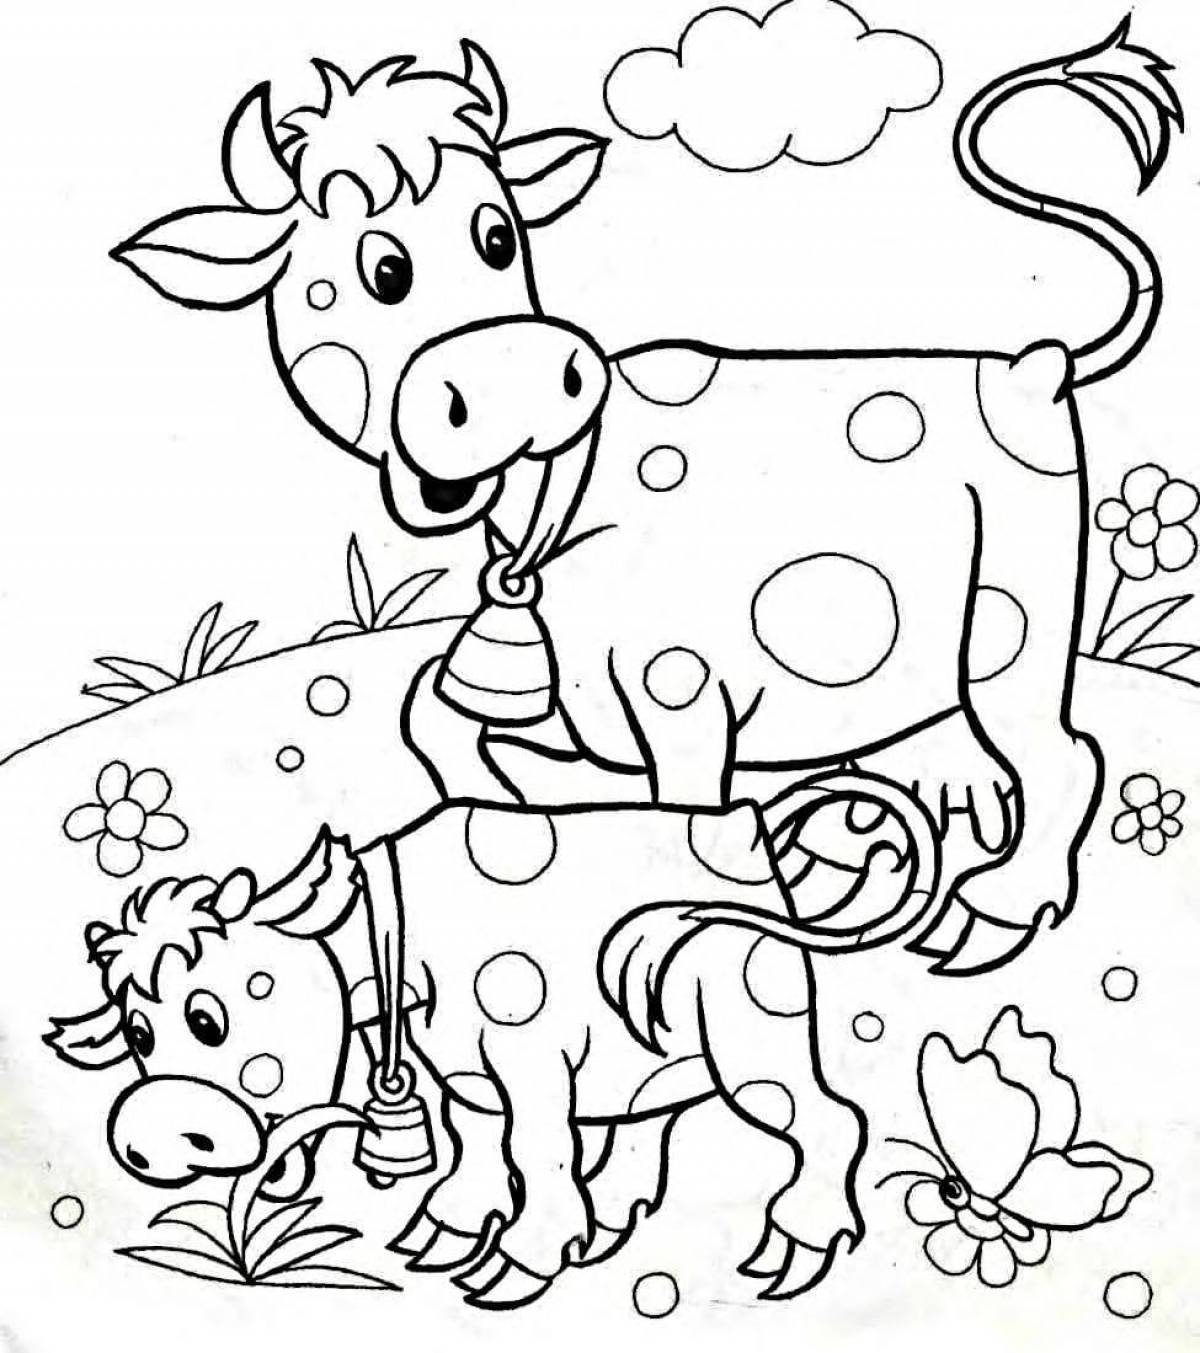 Fun coloring book pets for kids 3-4 years old